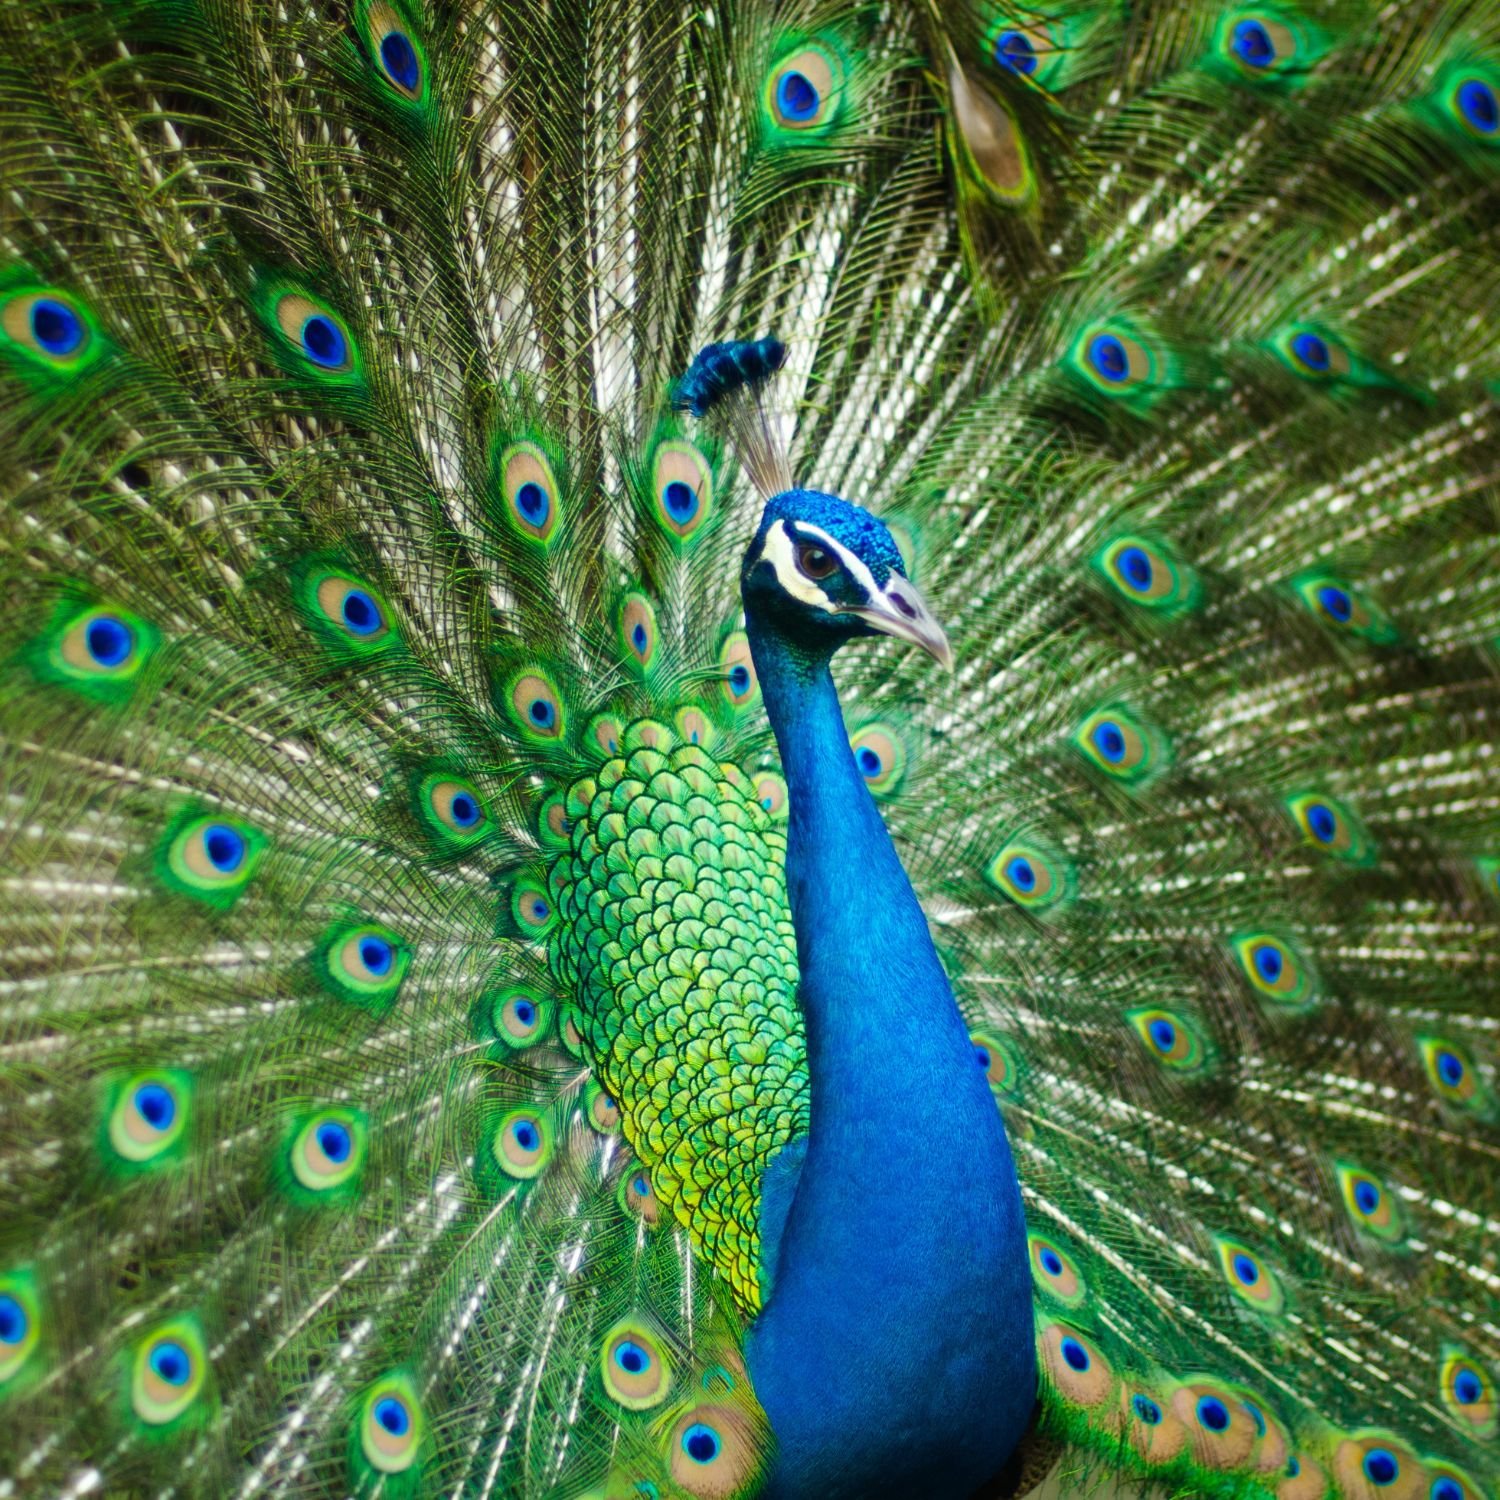 The meaning and symbolism of the peacock feather in peacock jewellery